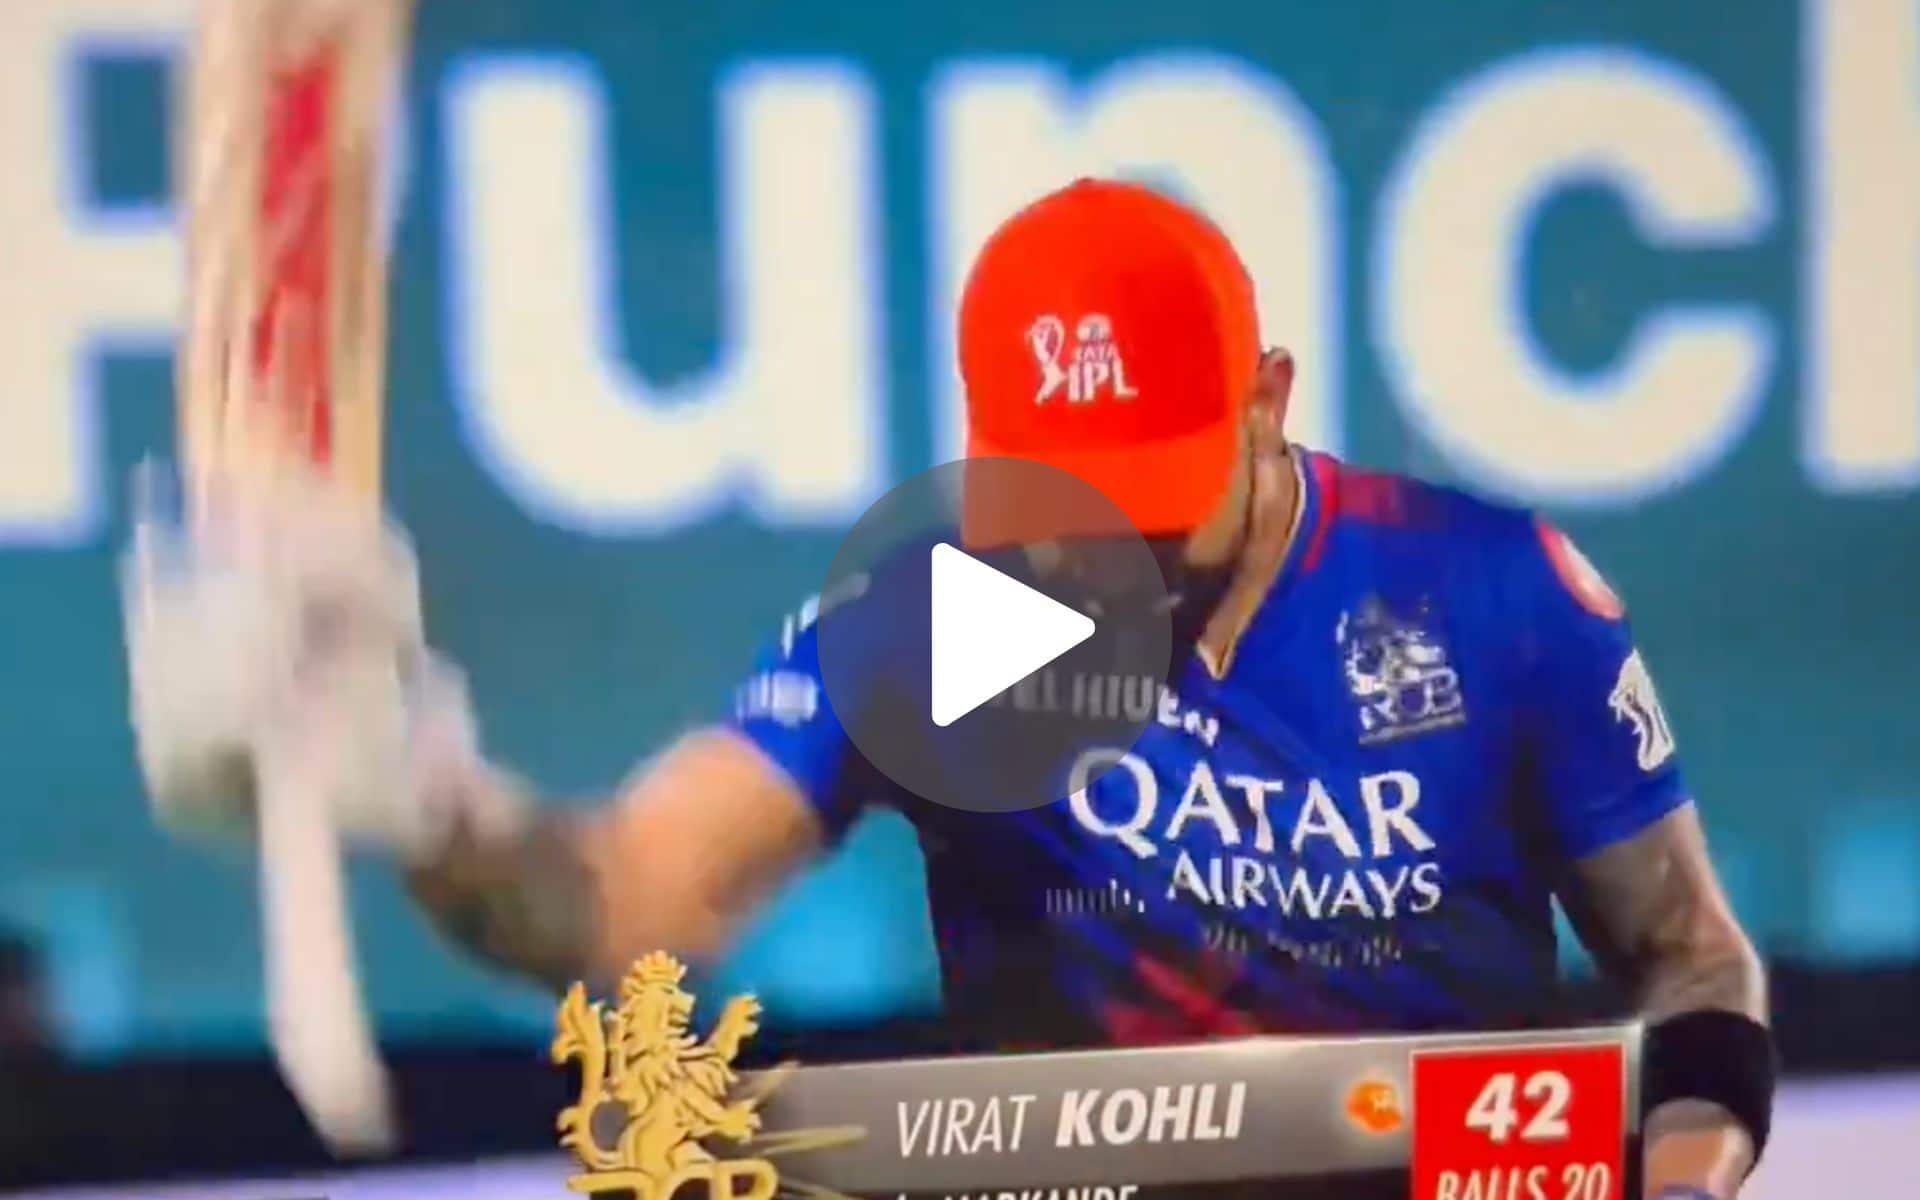 [Watch] 'Angry' Virat Kohli Abuses & Slams His Bat In Anger After He Falls Victim To Markande